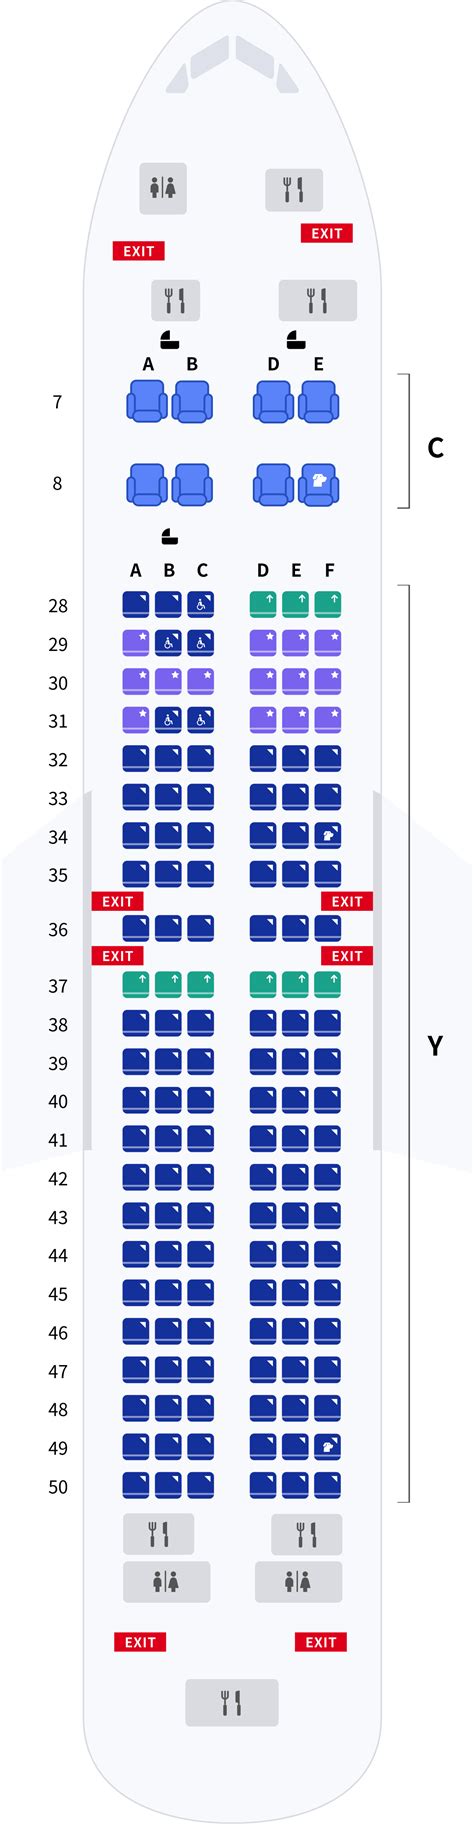 boeing 737 max 8 seat chart